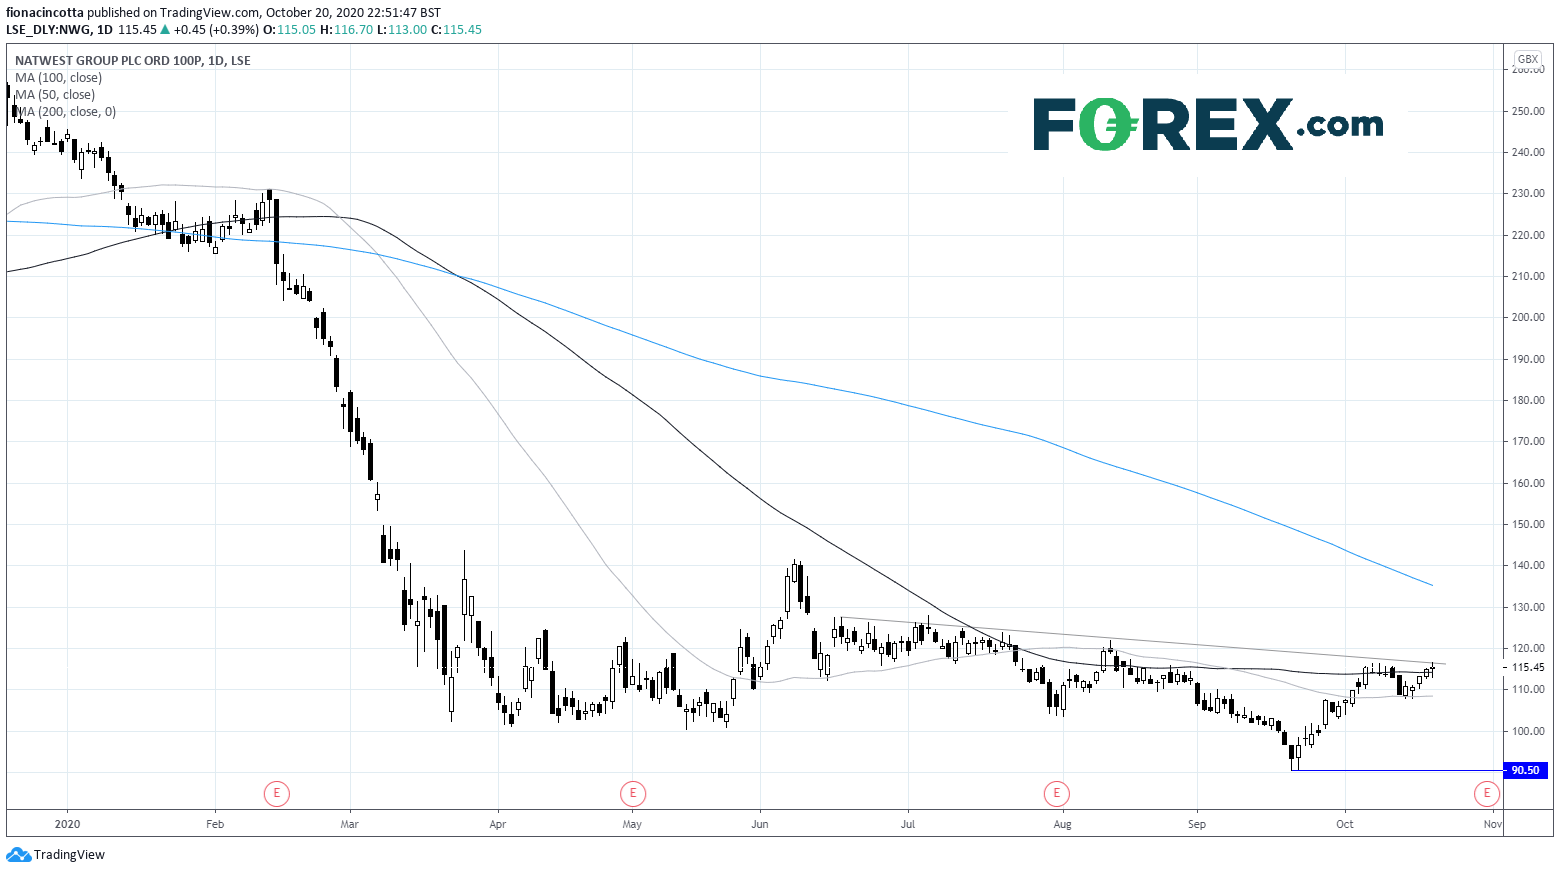 Market chart demonstrating how NatWest earnings to stabilise. Published in October 2020 by FOREX.com